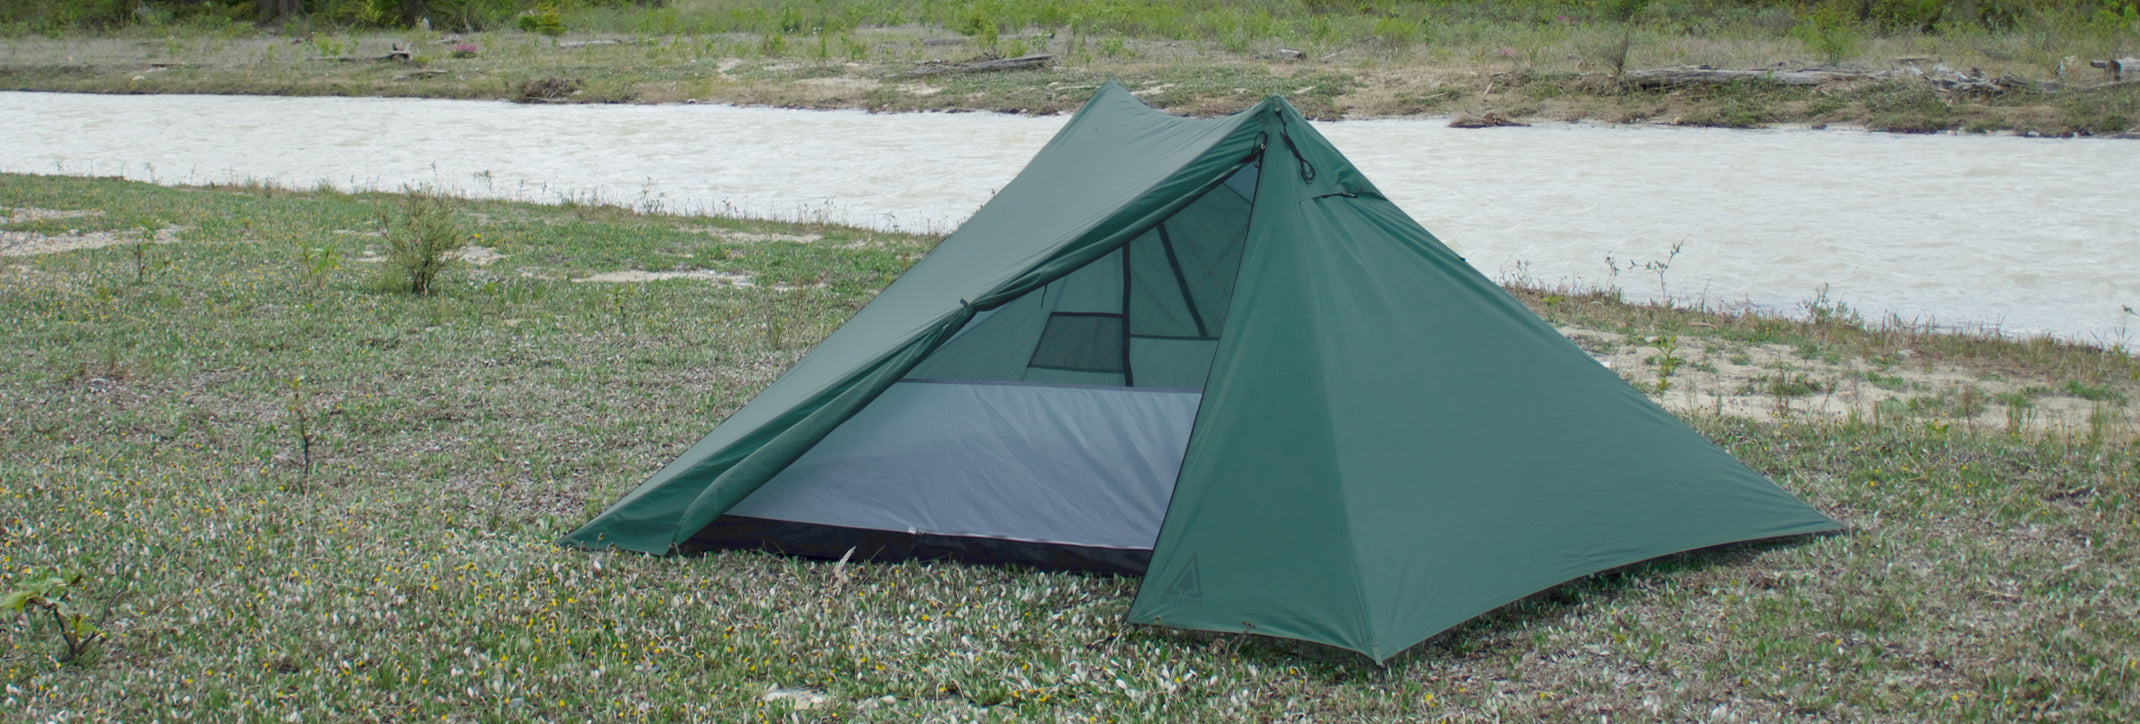 Durston Gear X-Mid 2 Solid Tent for ultralight backpacking and camping trekking pole shelter